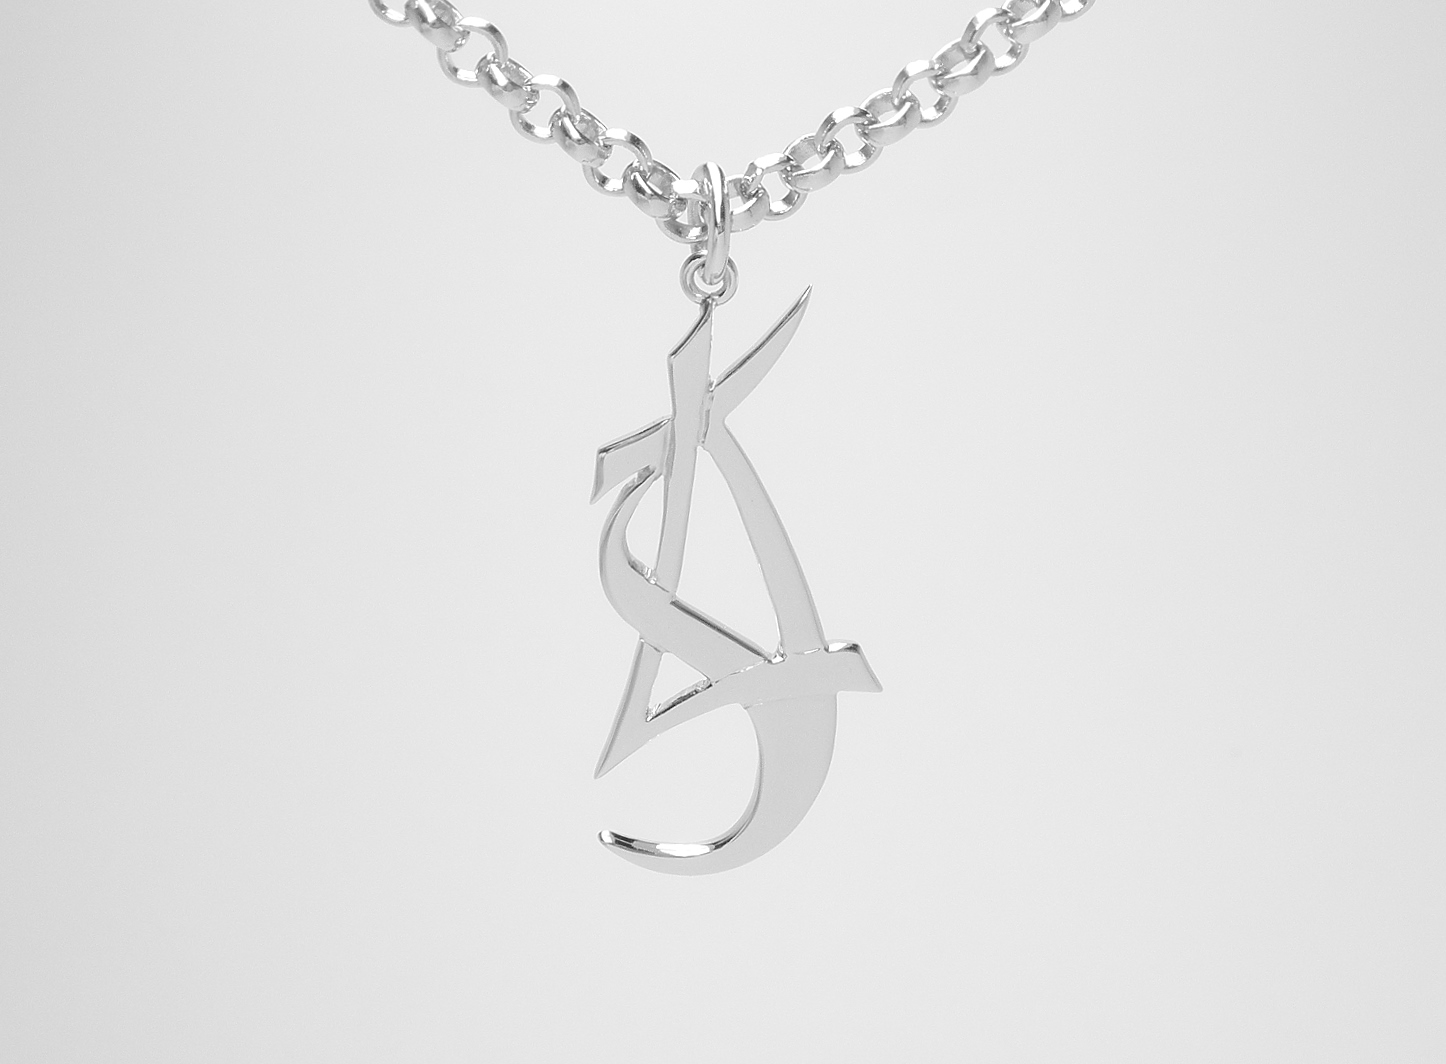 A 9ct. white gold stylised initial ' L, S, J ' pendant.